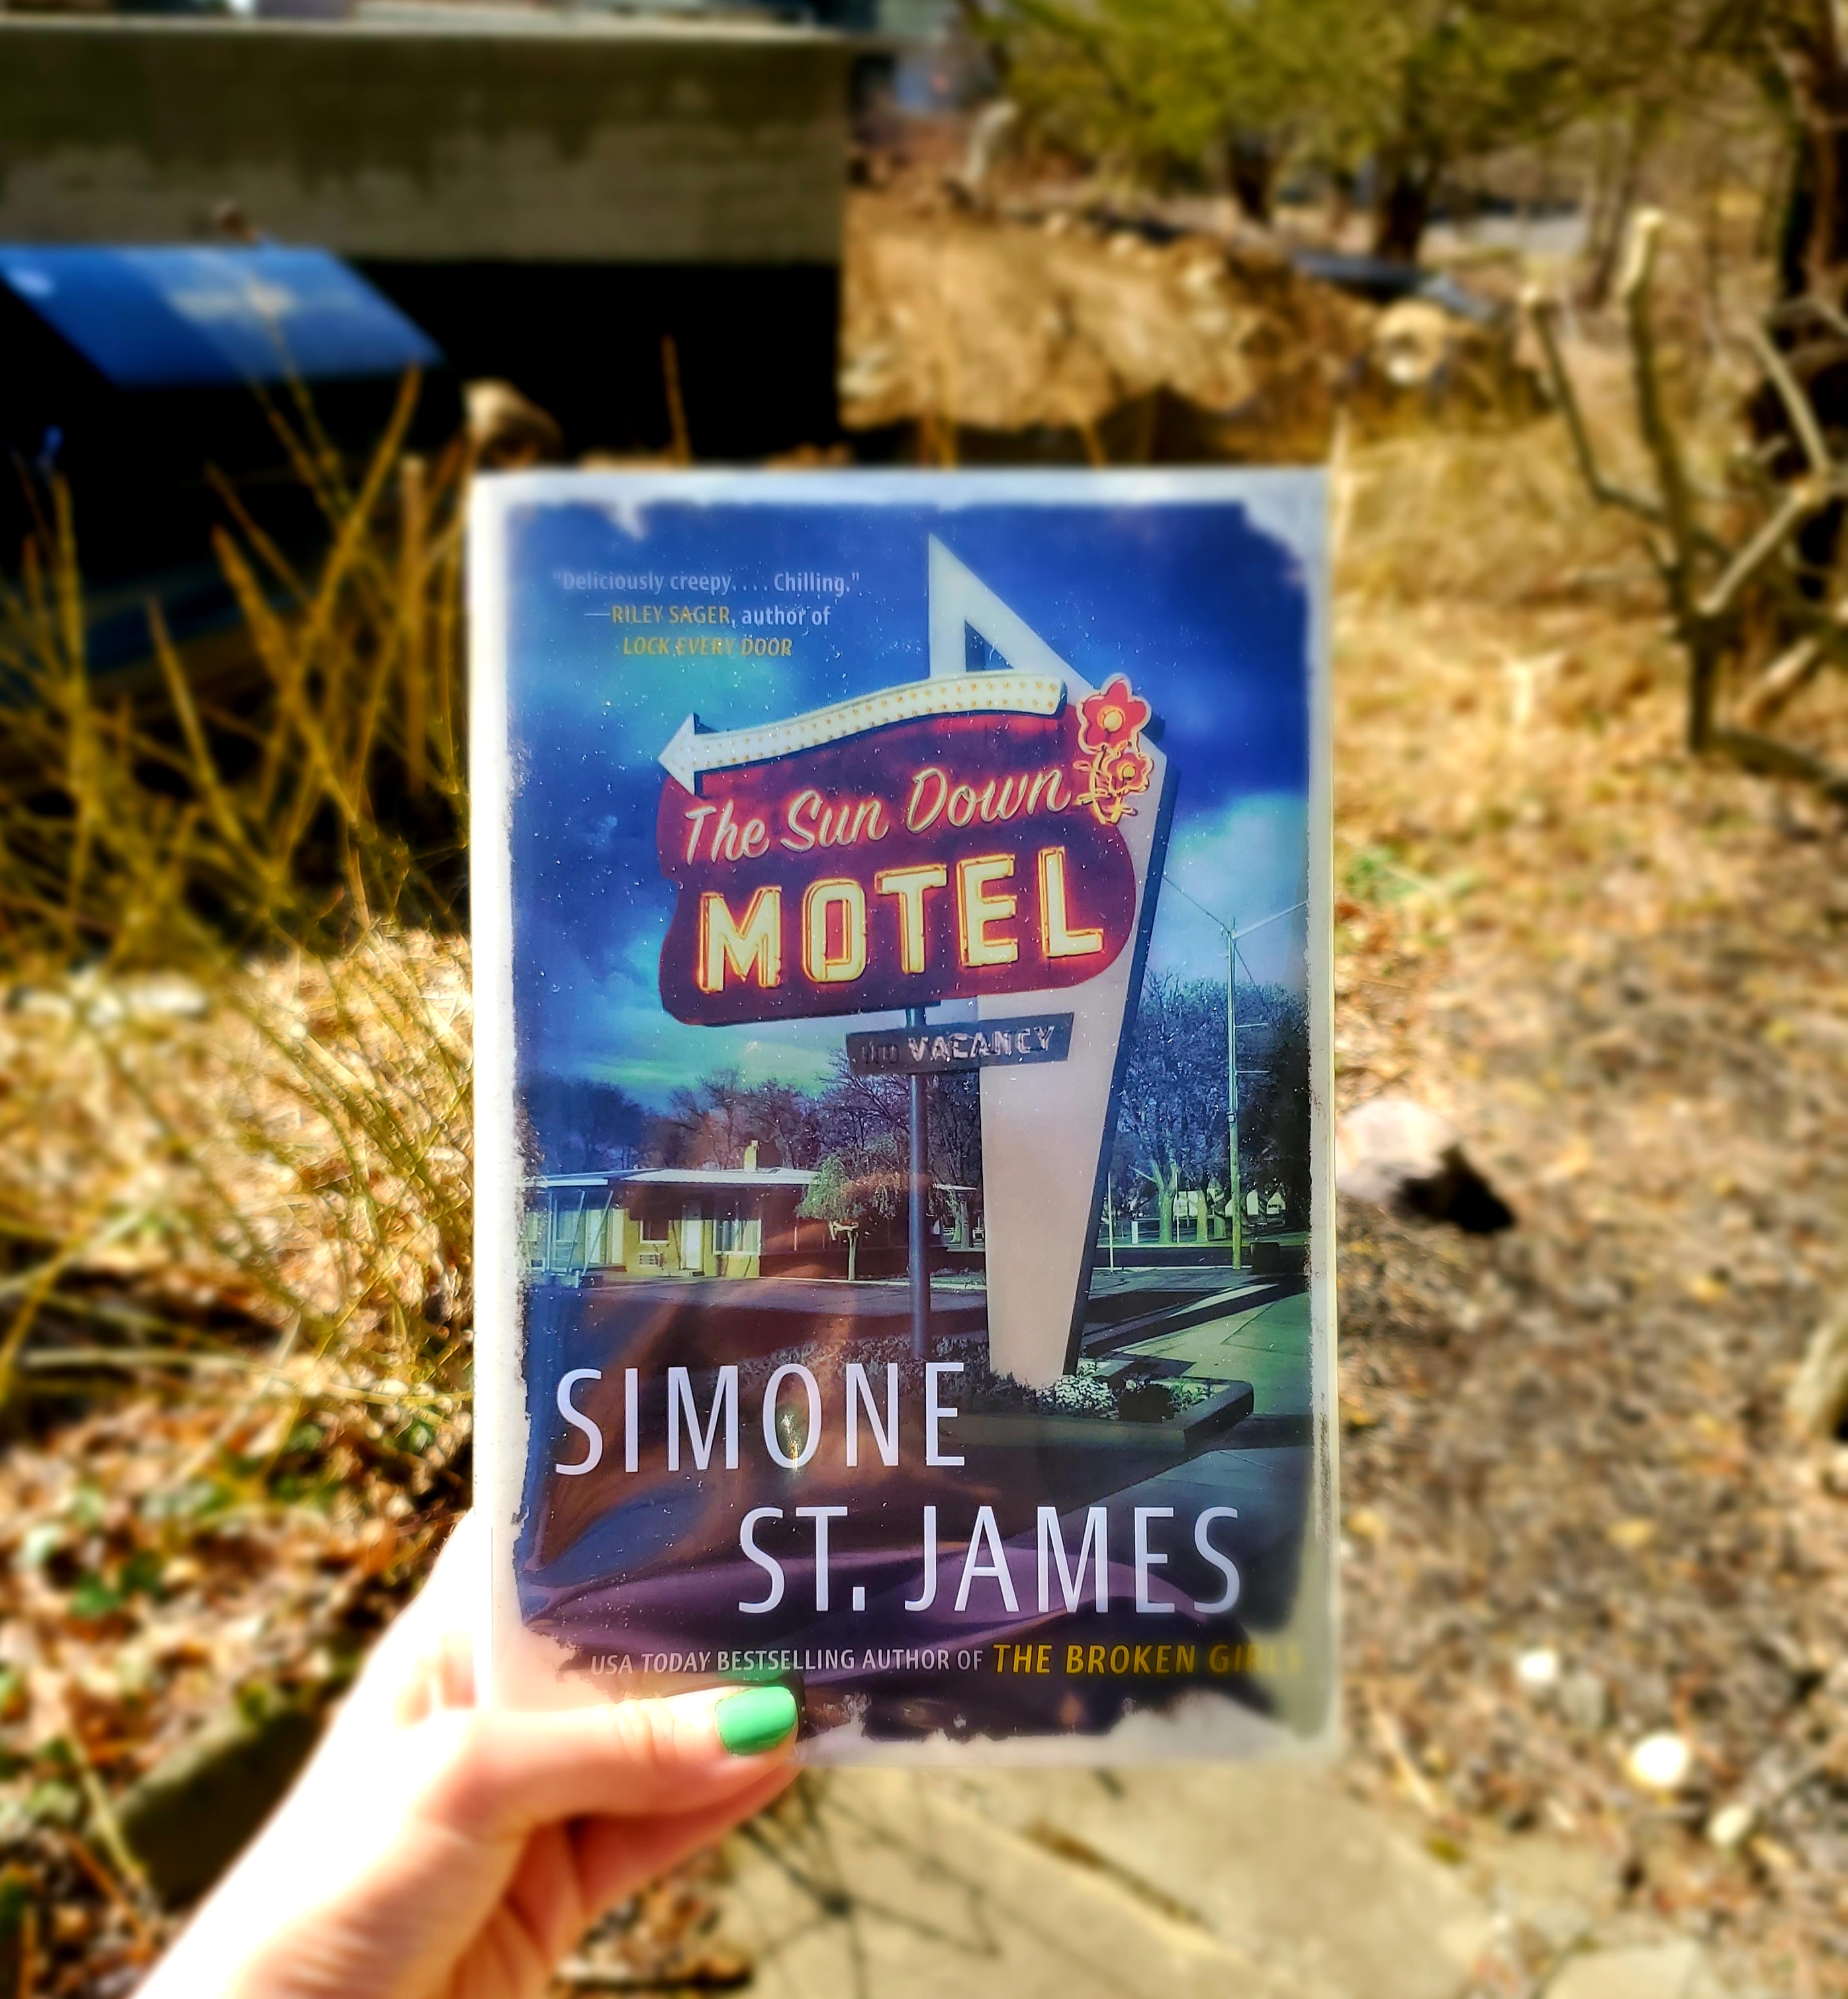 Book Review of THE SUN DOWN MOTEL